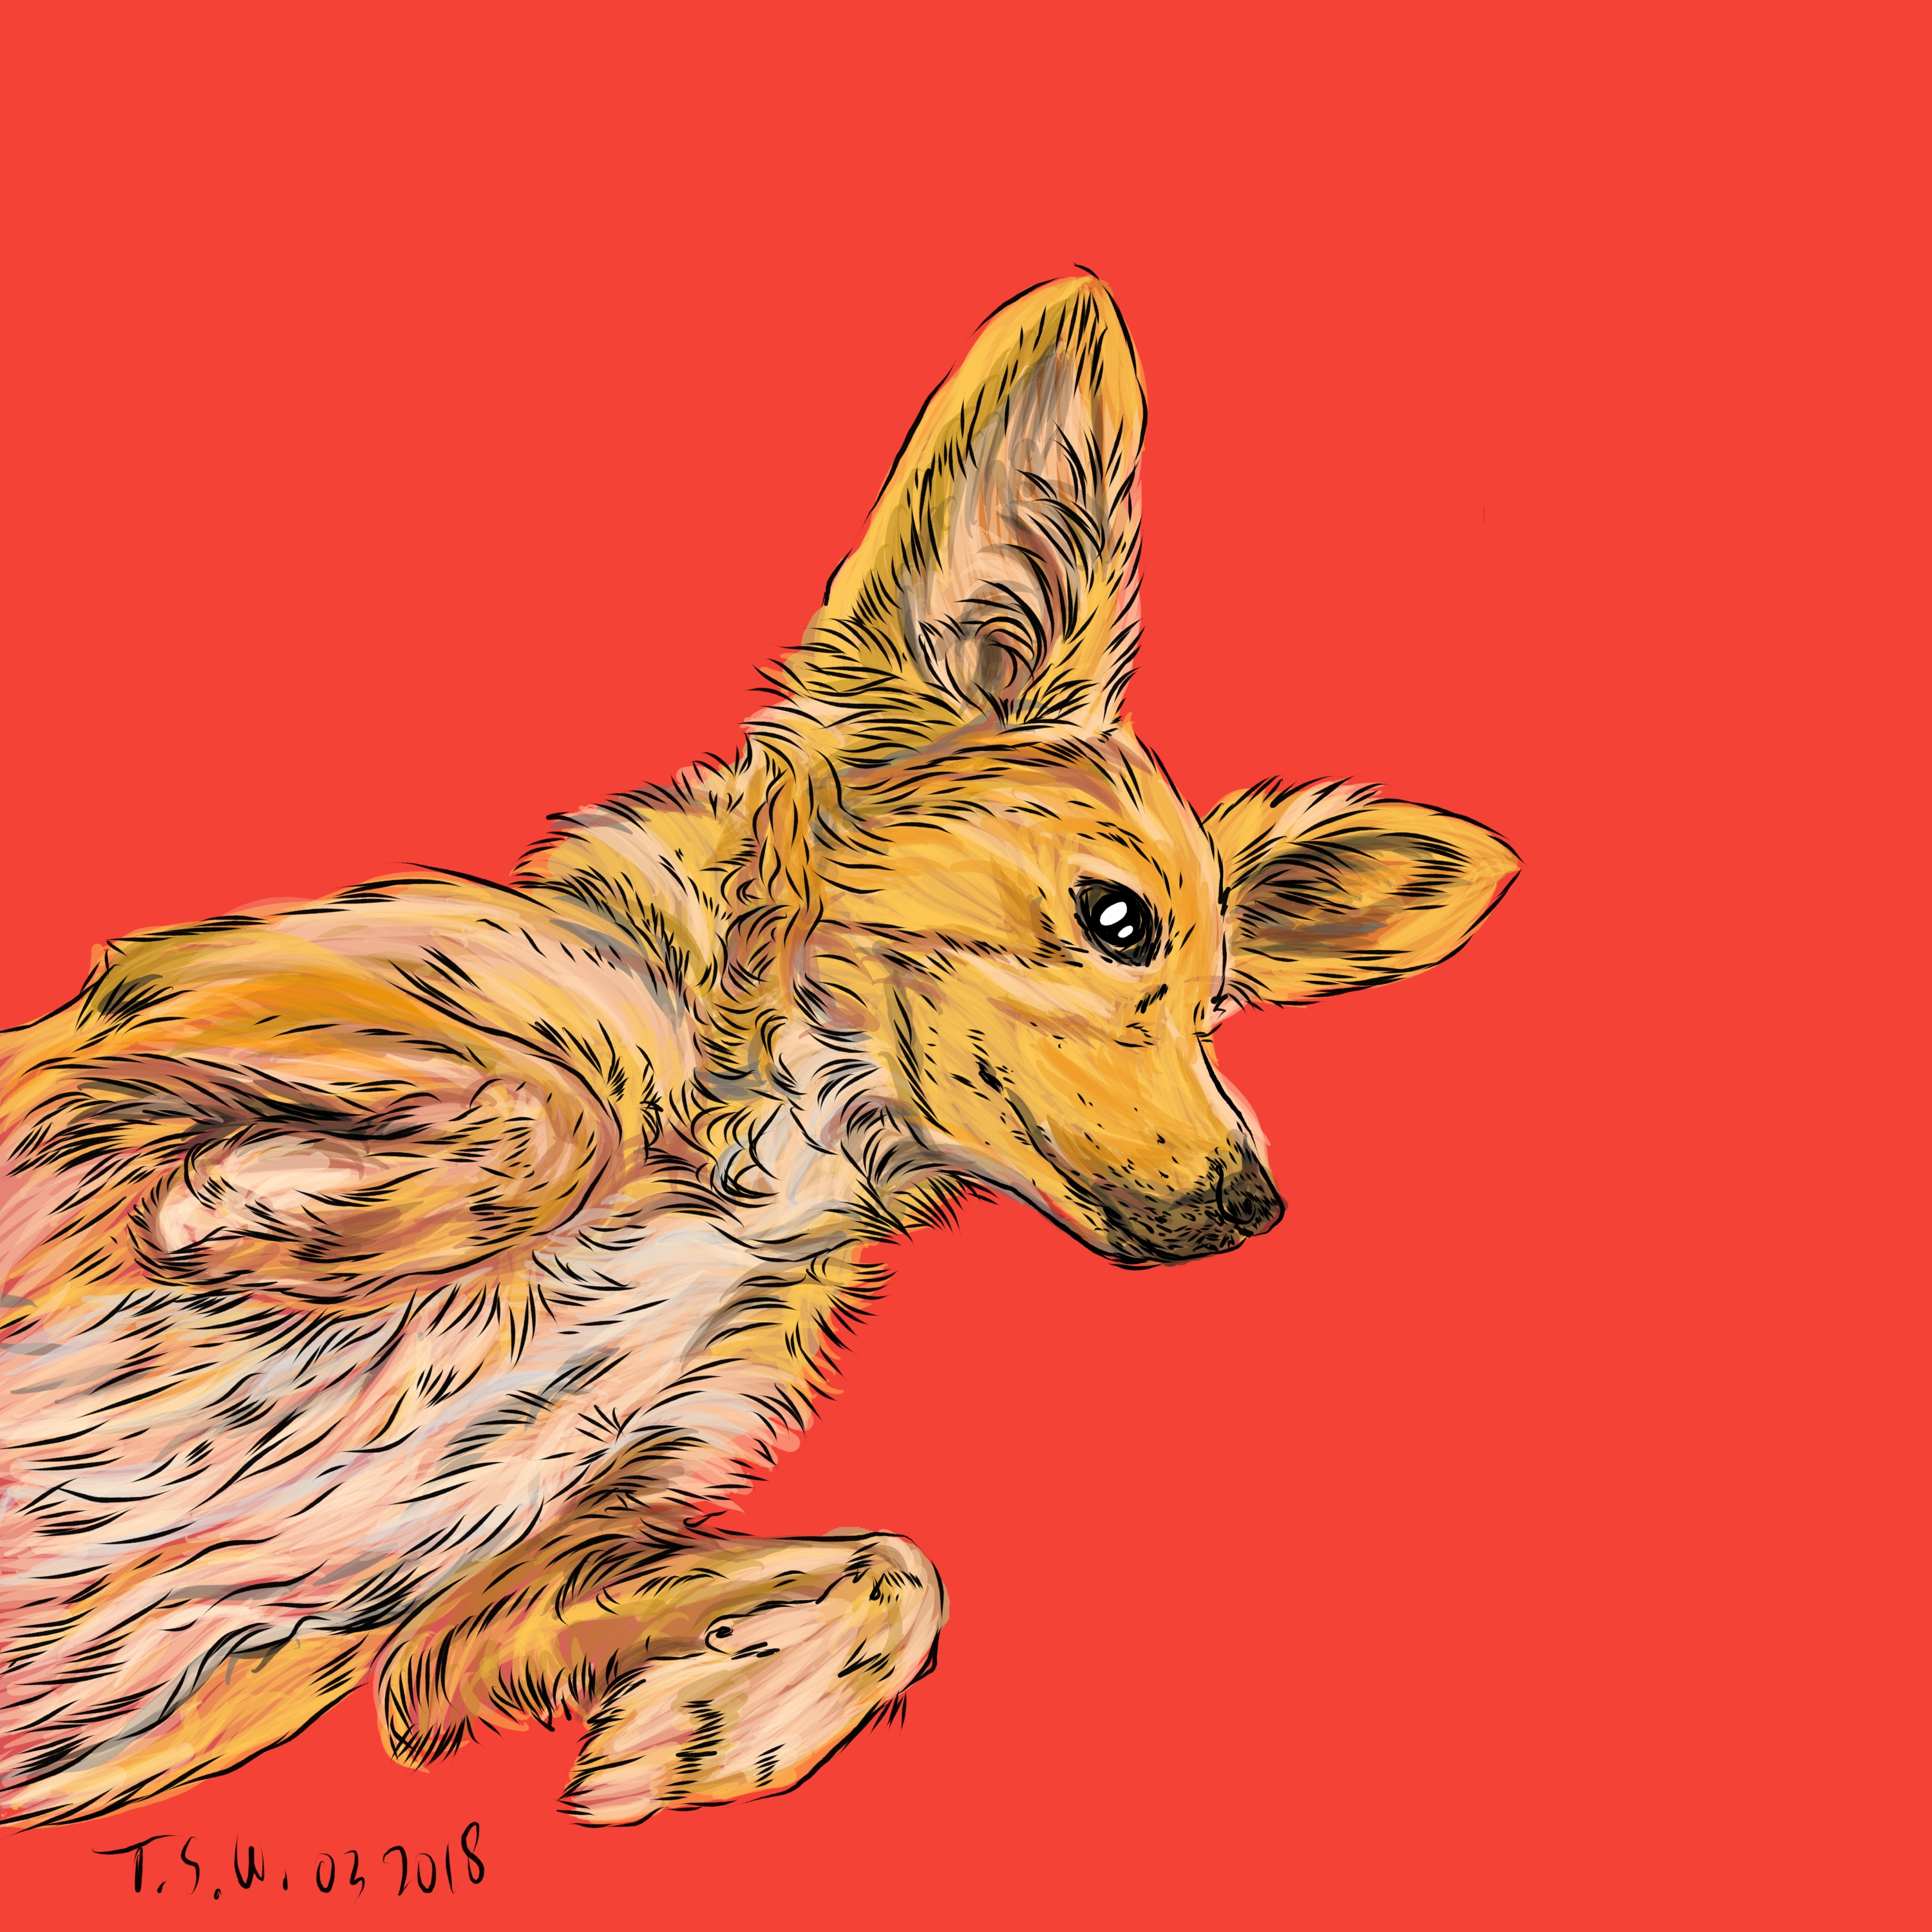 Drawing a dog